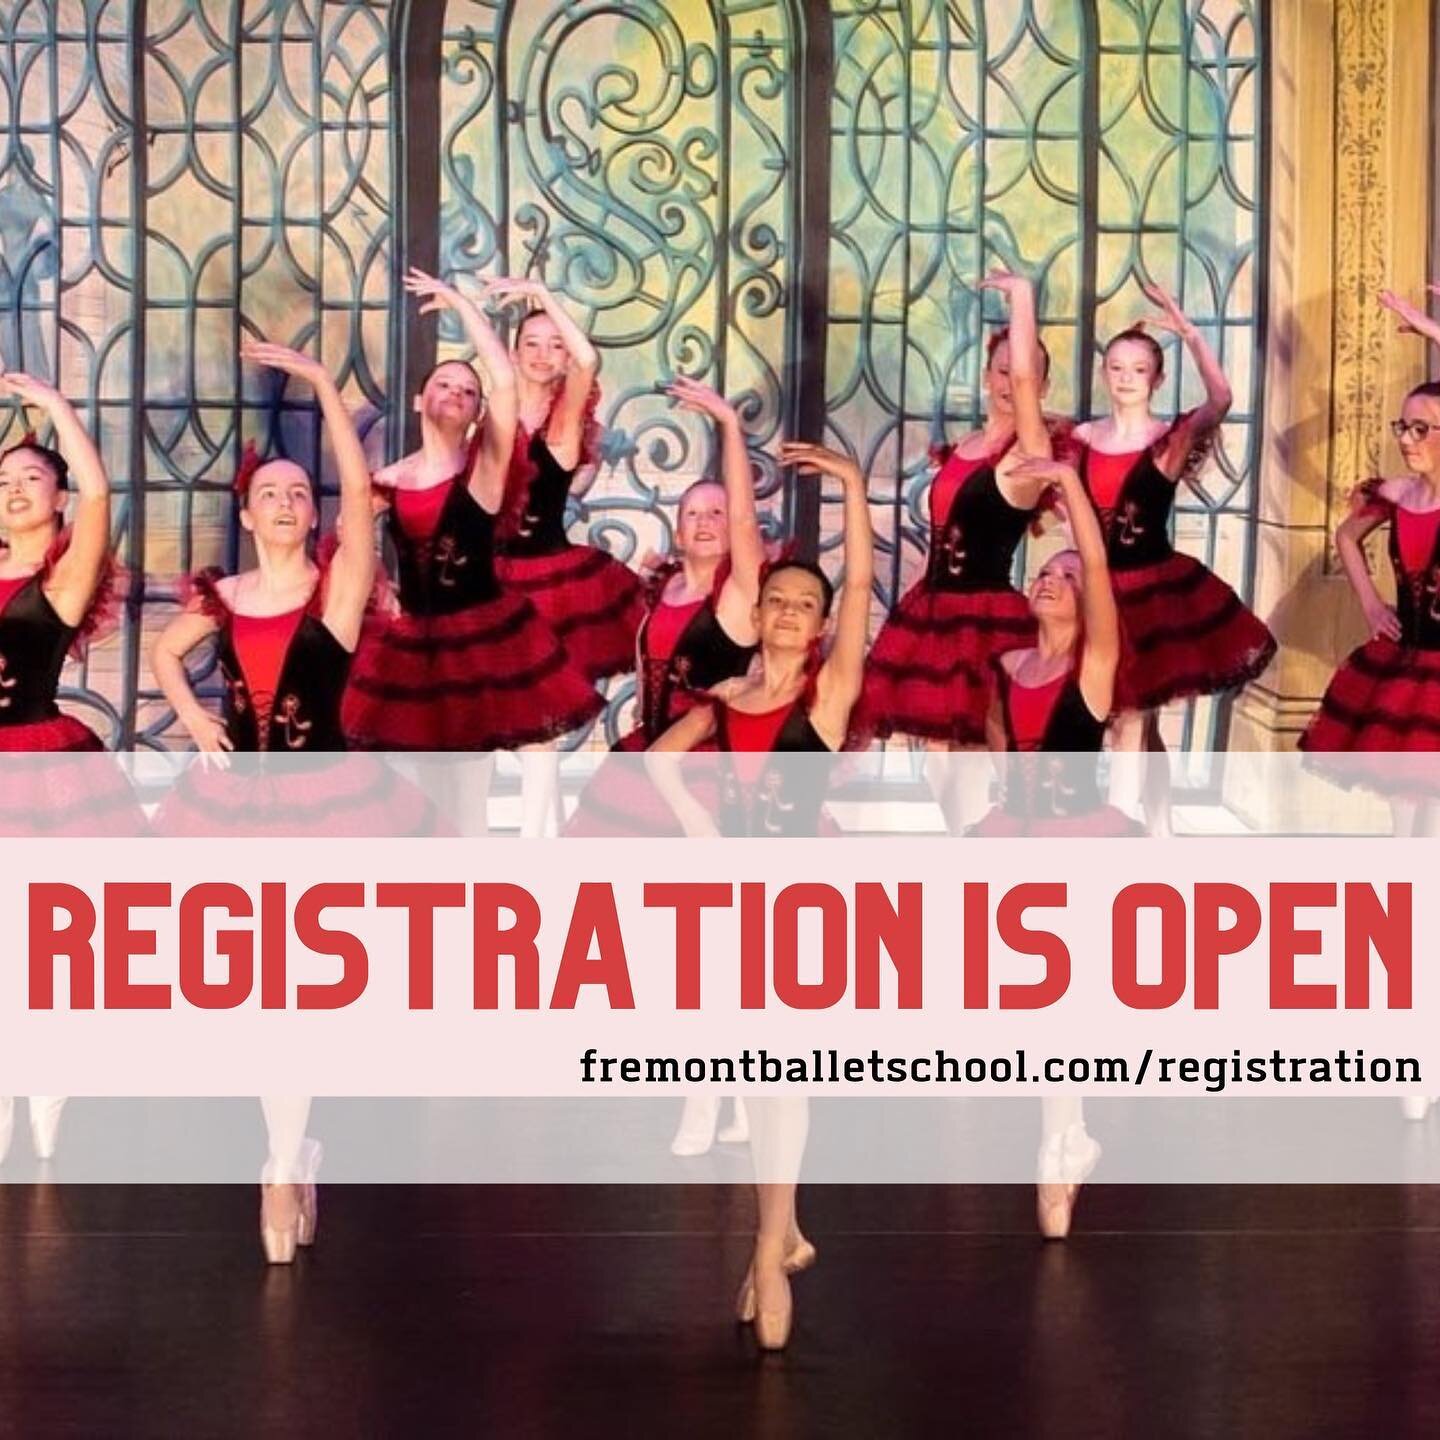 Registration is open, but space is filling up quickly! New and returning students can register using the link fremontballetschool.com/registration. Parents/guardians of returning students, if you haven&rsquo;t filled out our online registration form,